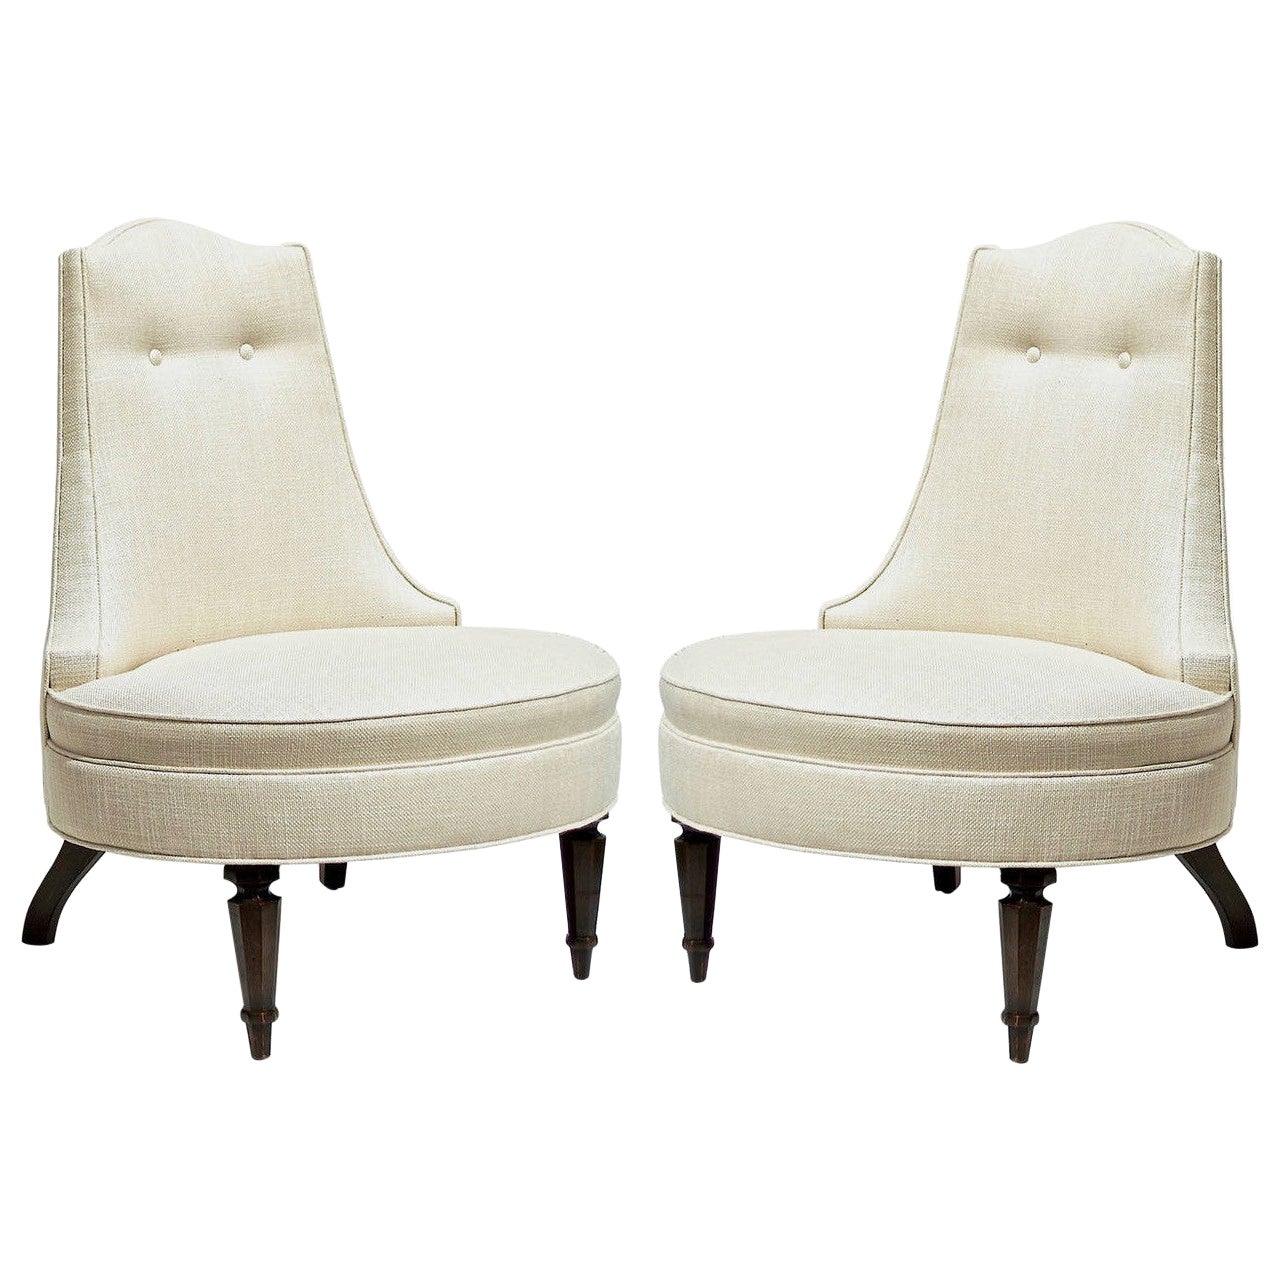 Pair of Glamorous Hollywood Regency Style Lounge Chairs